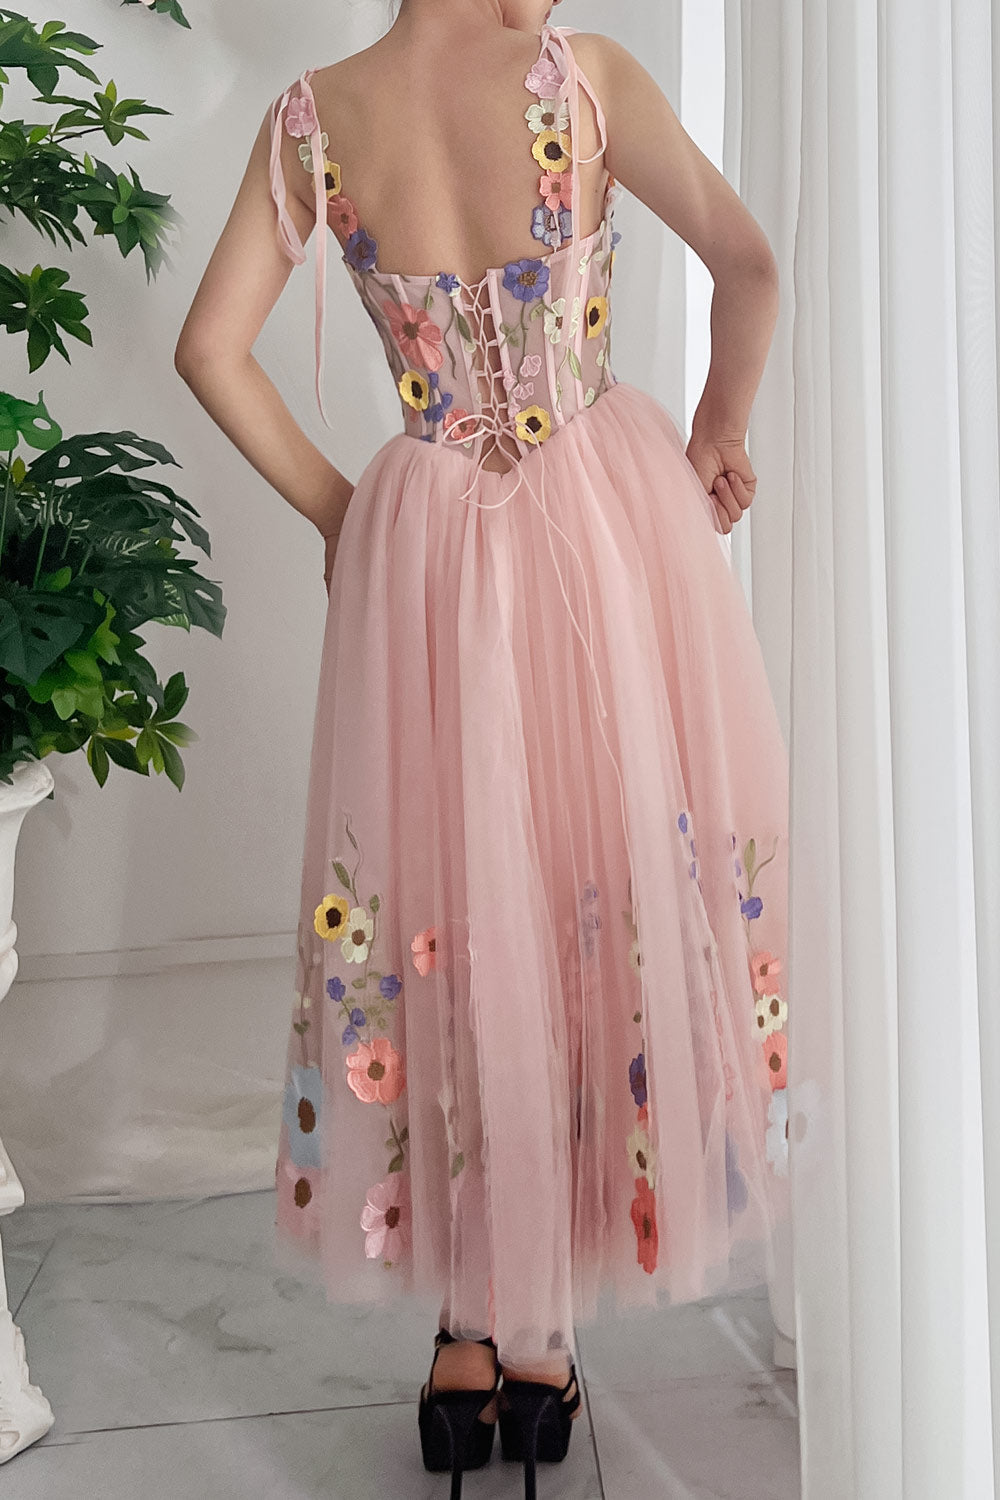 Corset Floral Embroidery Blush Pink Dress with Tie Straps